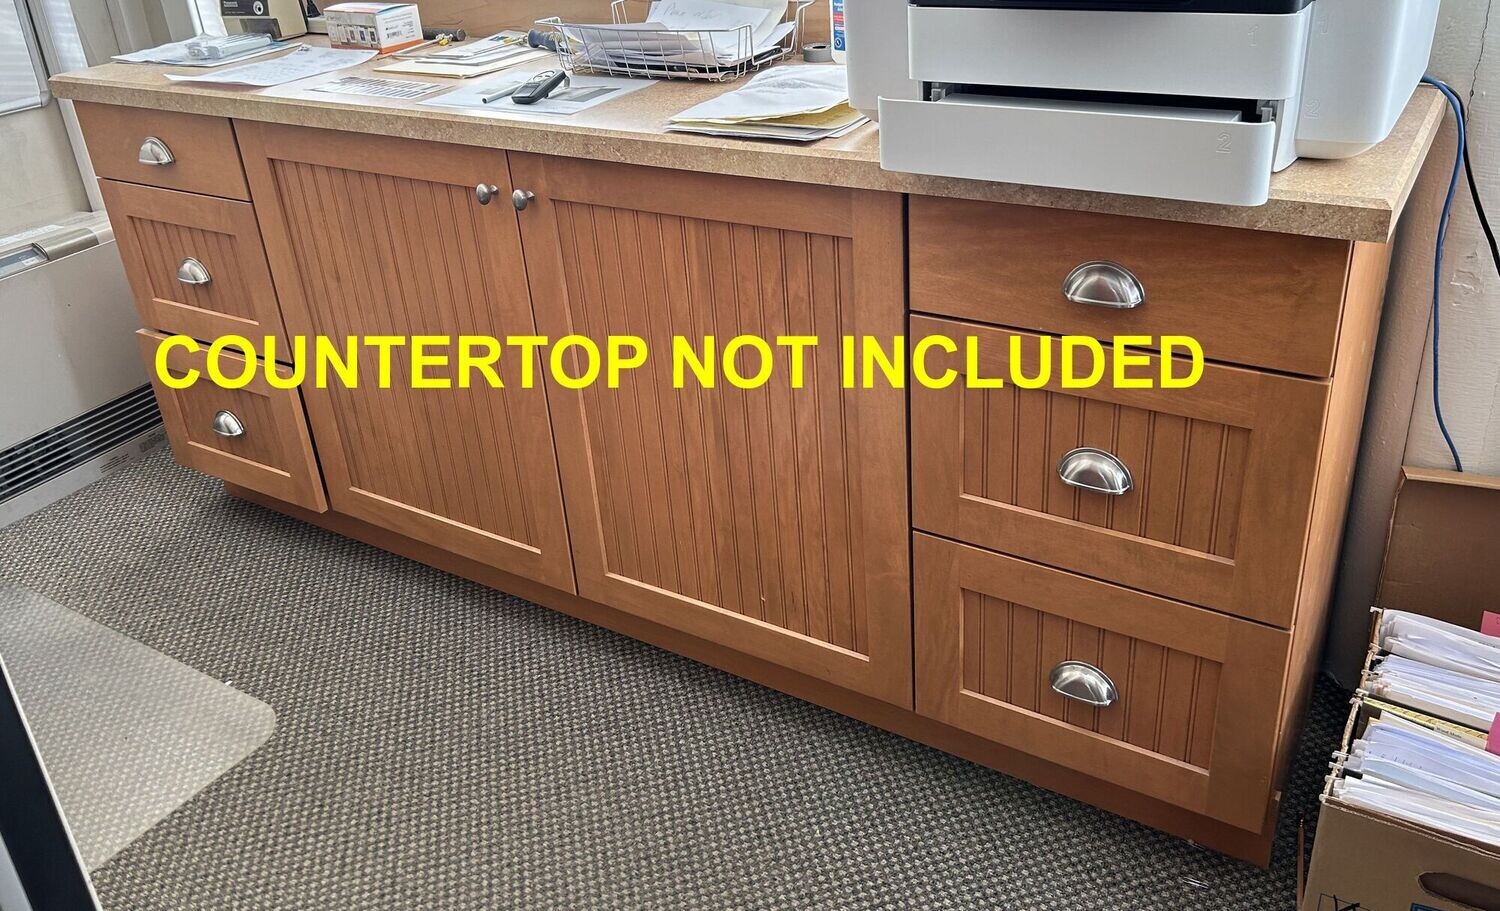 &quot;Beadboard&quot; Base Cabinets, 7 ft length, multi-use, solid wood, soft close (36-38) #1267, 1048 ** 10 days to sell, full price